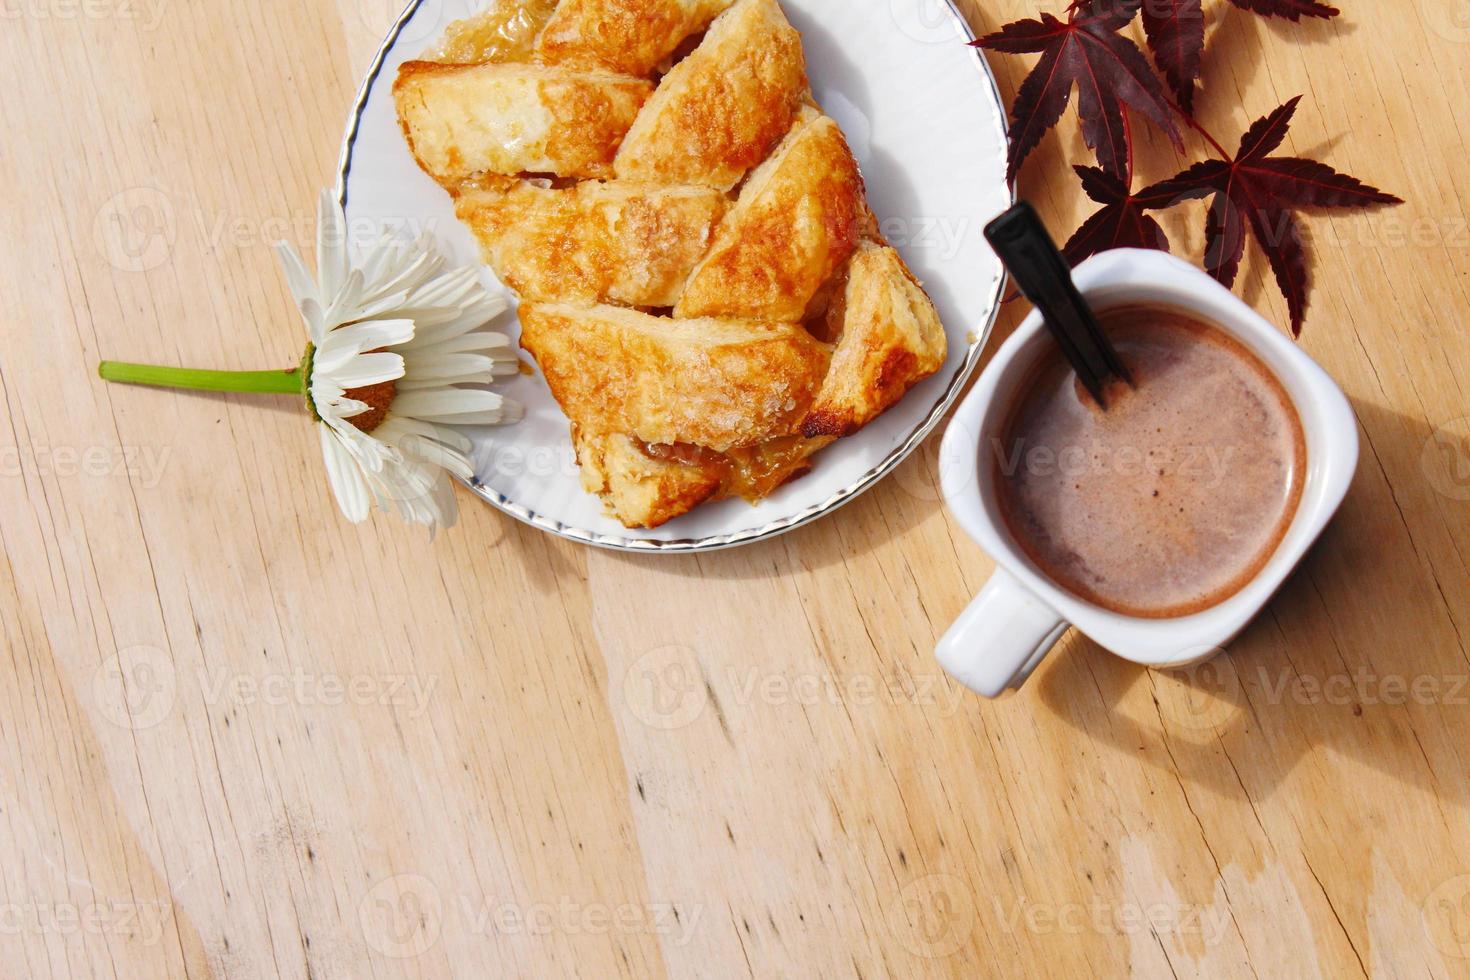 Coffee mugs and pastries served on a wooden table with crimson Japanese maple leaves and white daisies. Top view photo. photo